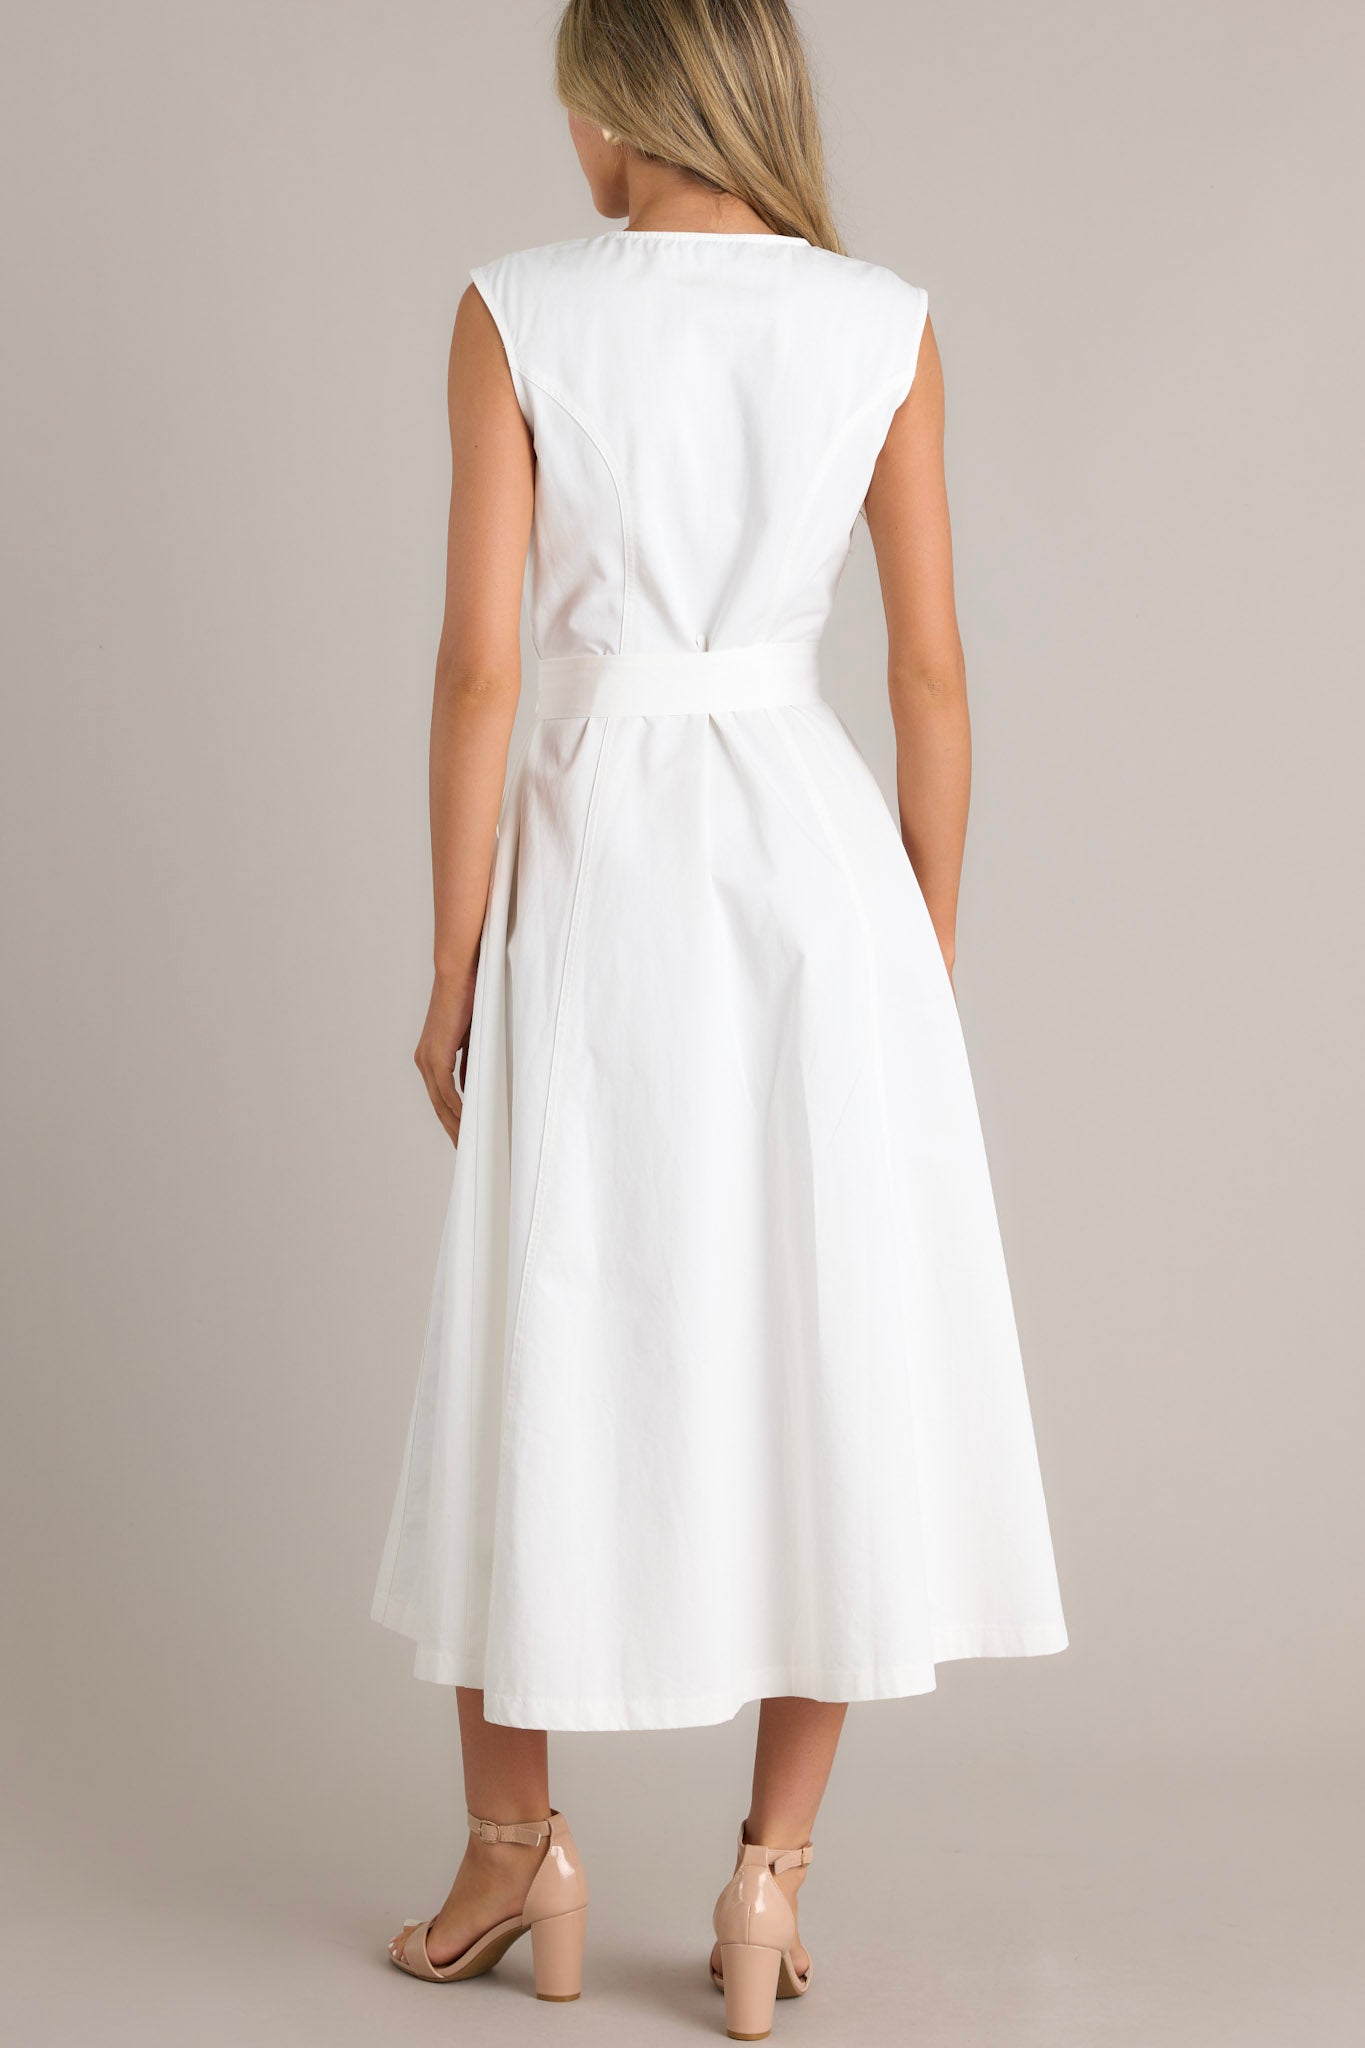 White sleeveless midi dress with a front zipper, fitted bodice, wide waist tie, and flared skirt.